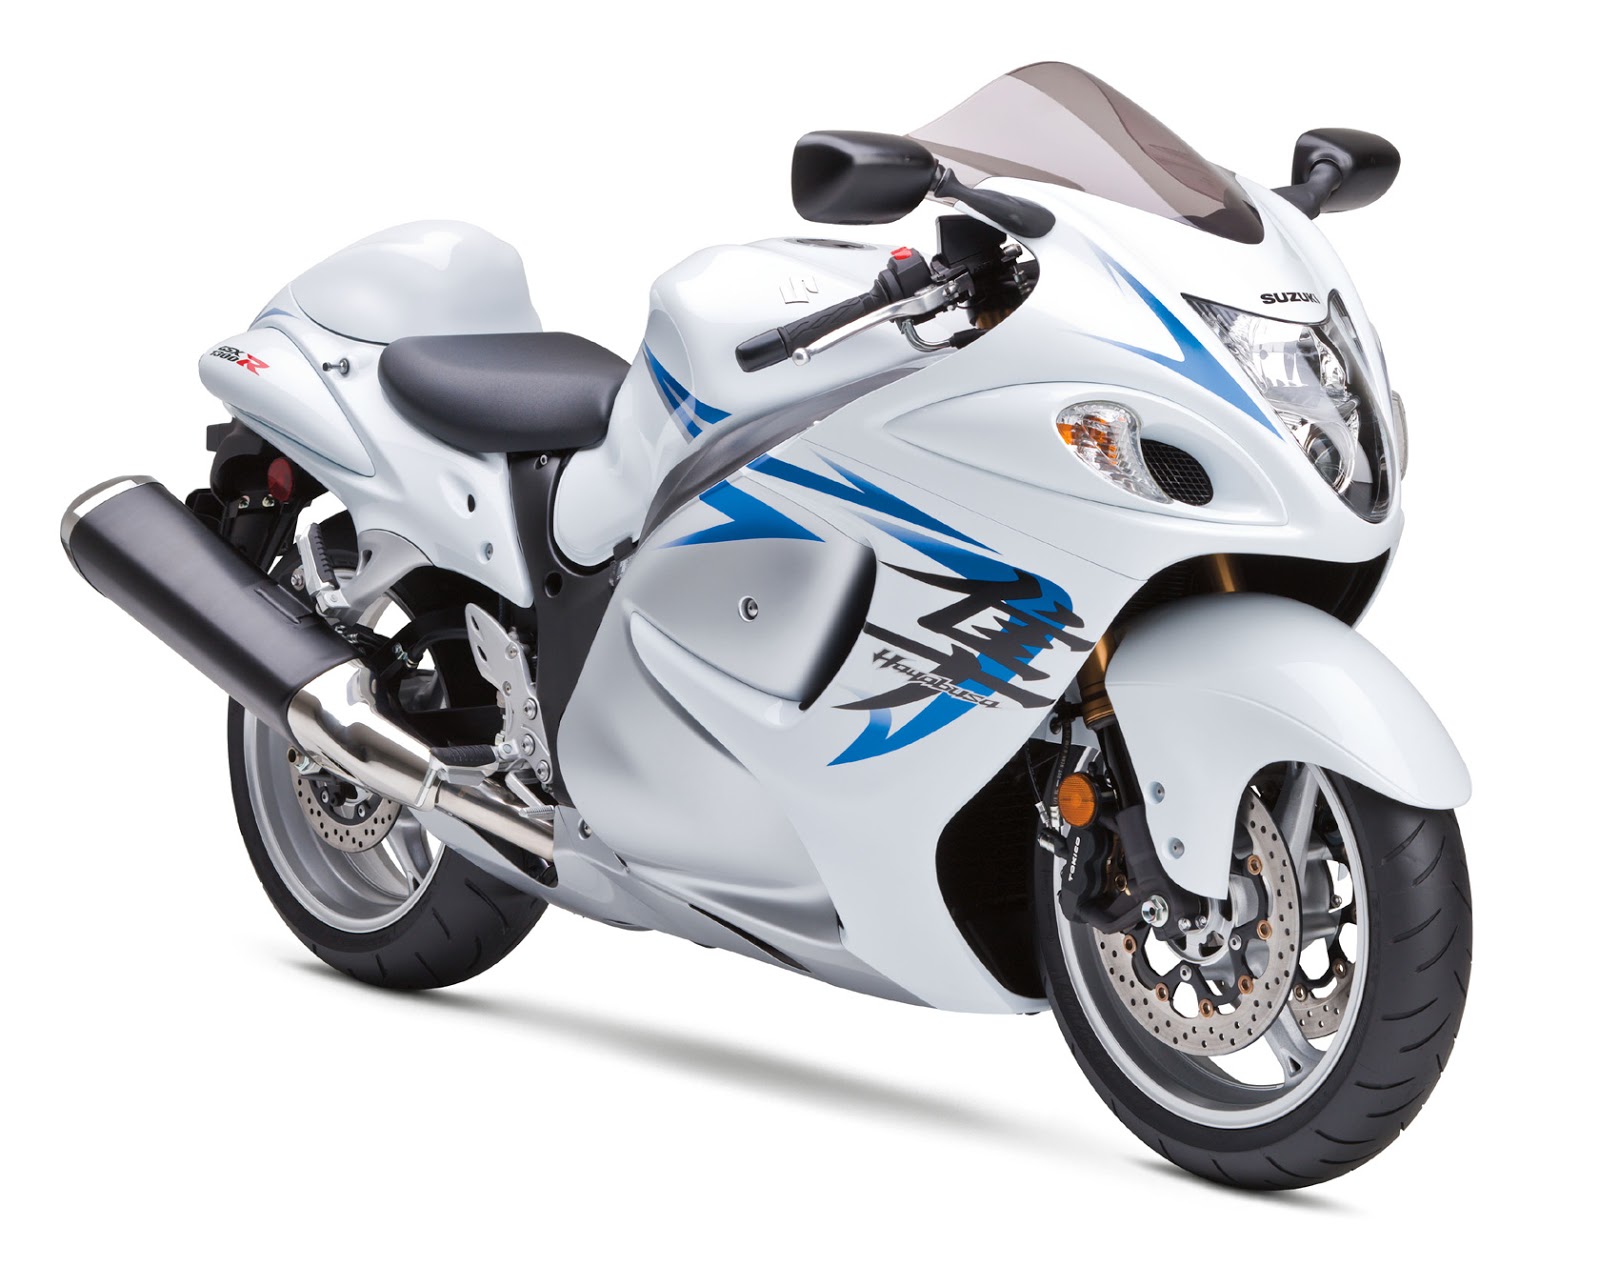 Suzuki Hayabusa GSX1300R Pictures and Wallpapers ~ Top ...